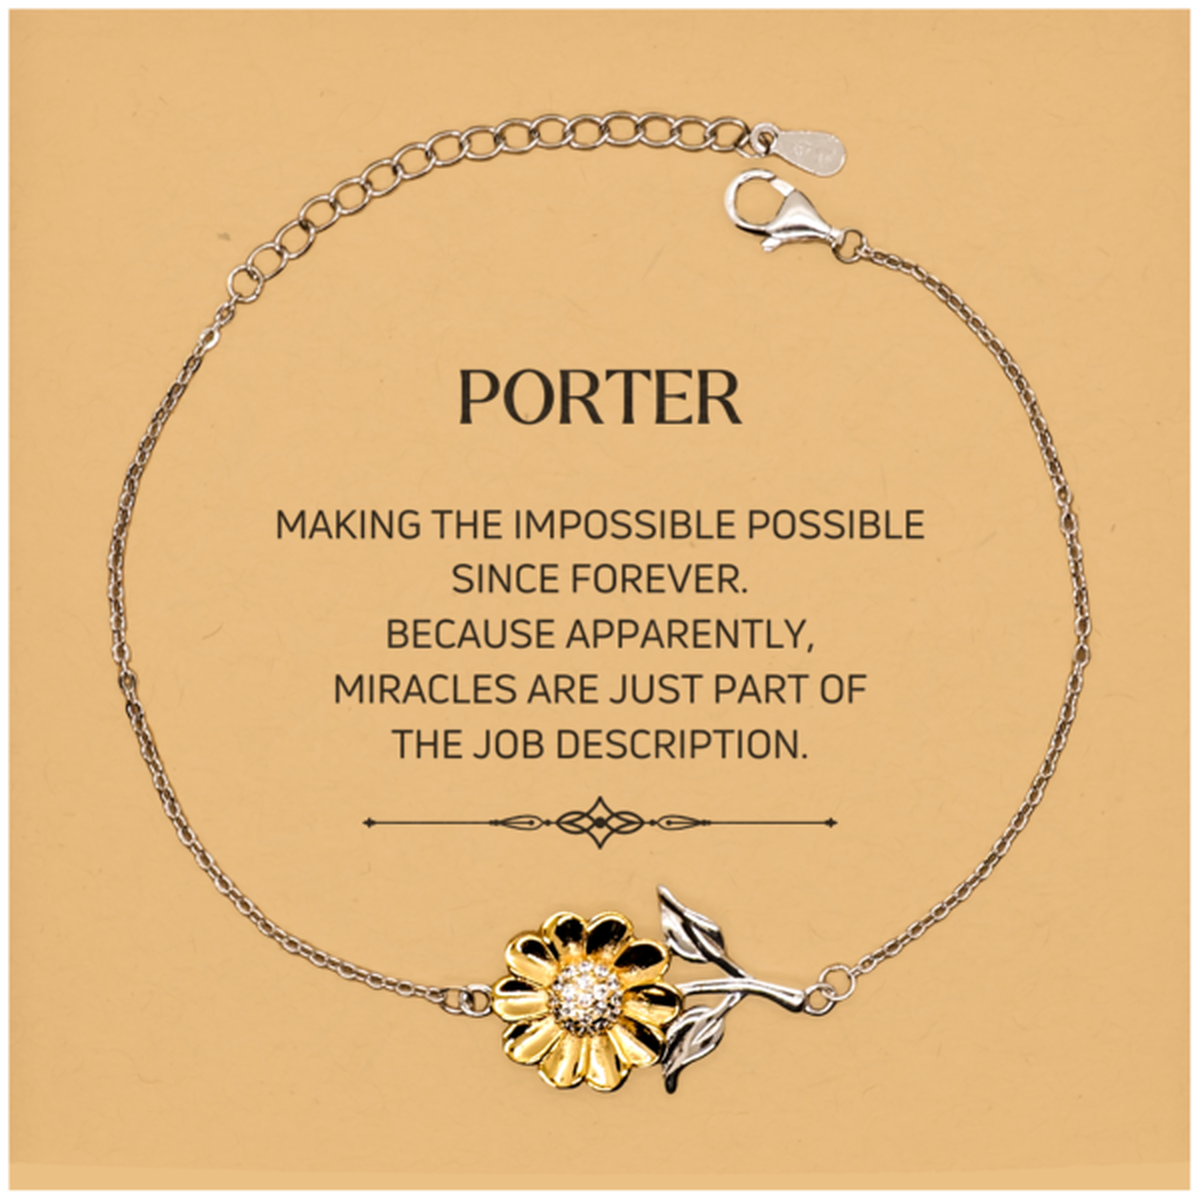 Funny Porter Gifts, Miracles are just part of the job description, Inspirational Birthday Christmas Sunflower Bracelet For Porter, Men, Women, Coworkers, Friends, Boss